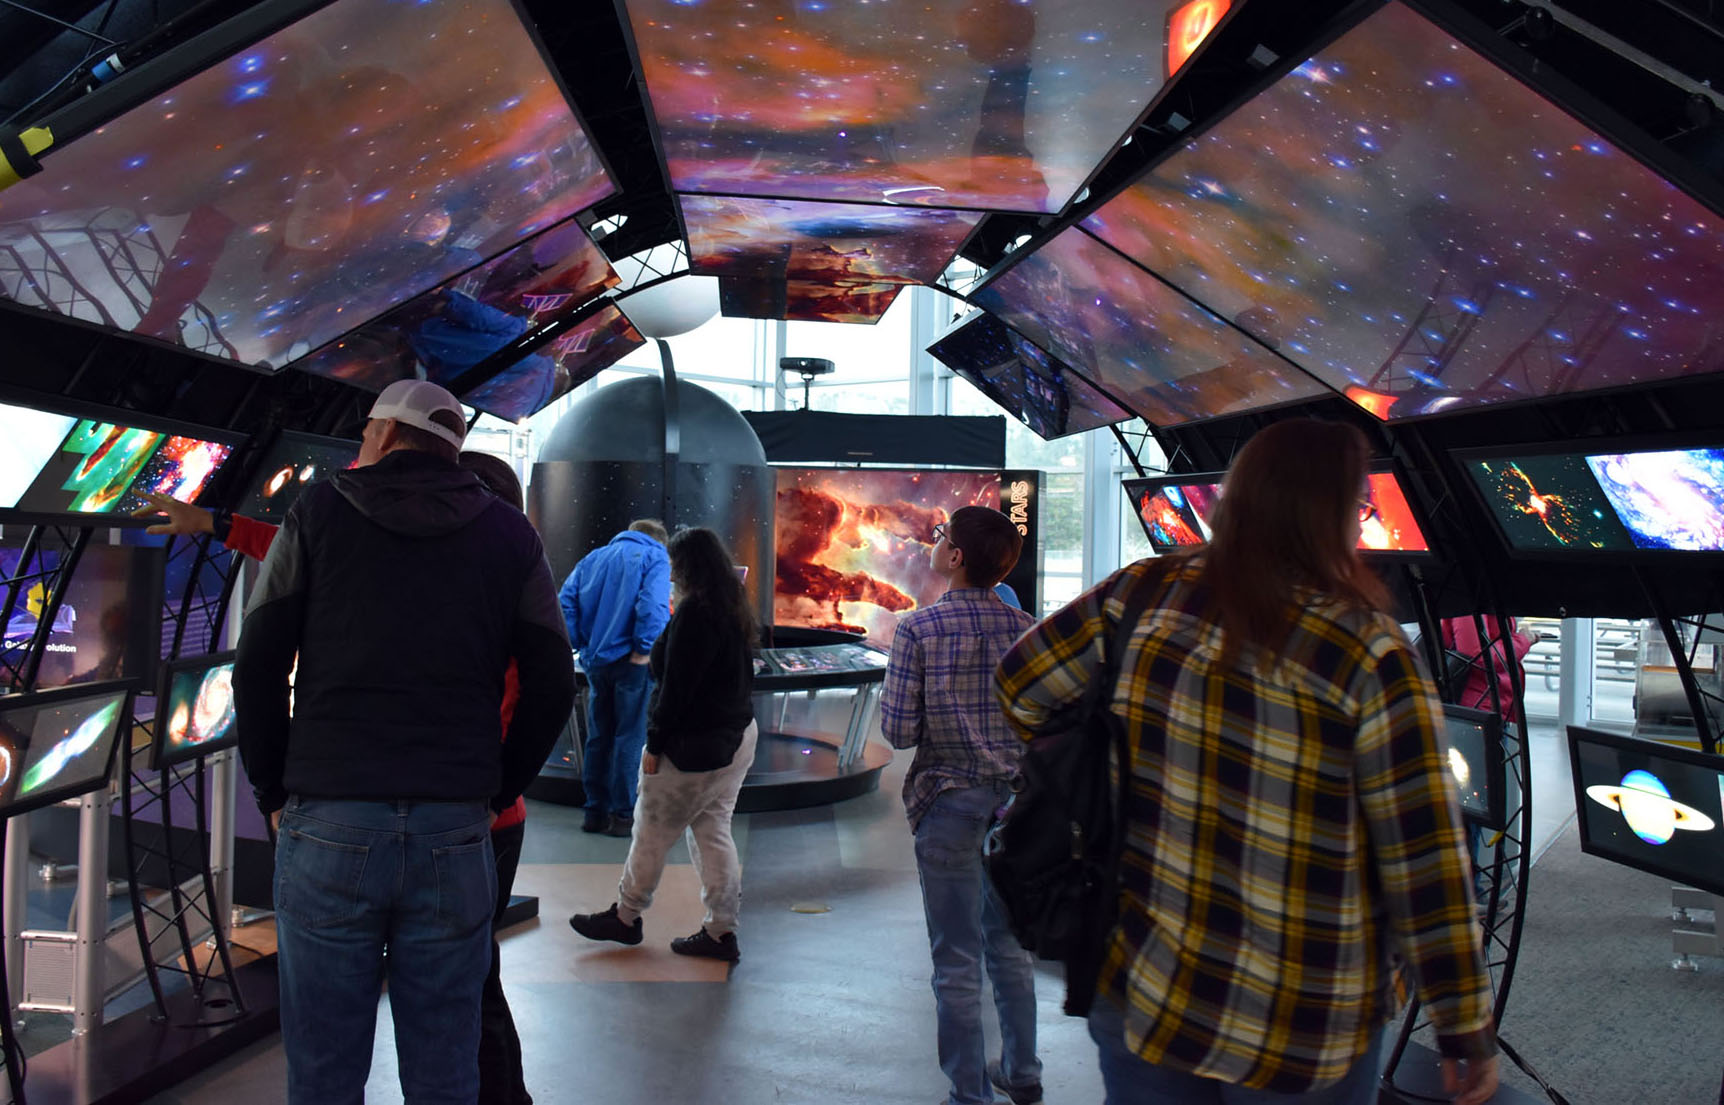 Visitors walk through the Hubble Space Telescope traveling exhibit. An arch of images from the Hubble Space Telescope stretches across the image, from the lower-left, across the top, to the lower-right. People are standing under the arch admiring the images.